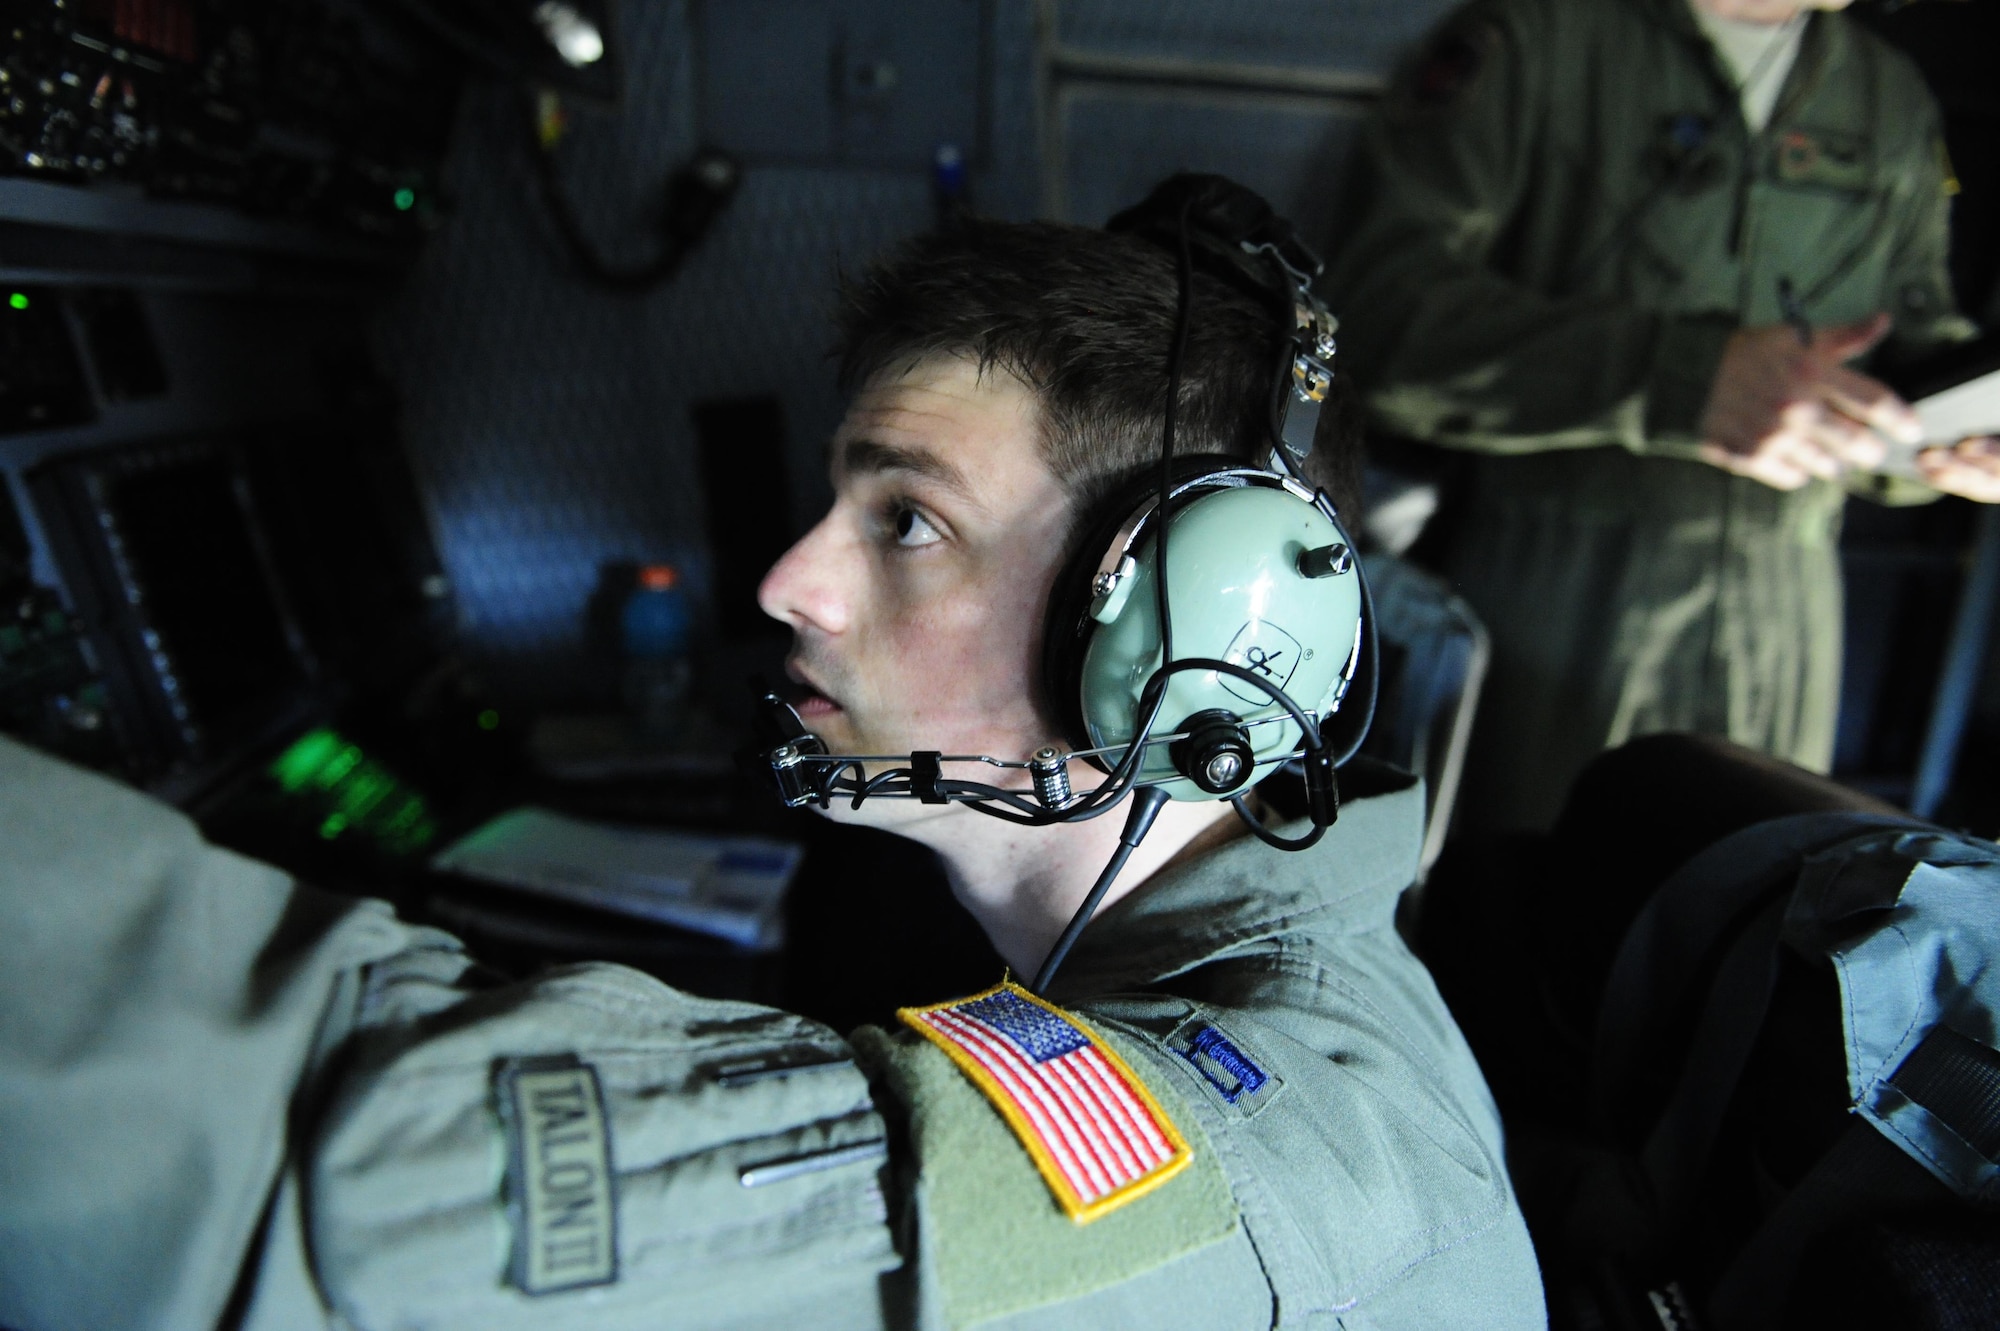 U.S. Air Force Capt. Thomas Sanders, 353rd Special Operations Support Squadron instructor navigator, prepares equipment before taking off aboard a MC-130H Combat Talon II Sept. 10, 2015 at Kadena Air Base, Japan. Sanders received the Airlift/Tanker Association Young Leadership Award during an award banquet held Oct. 29 in Orlando, Fla. (U.S. Air Force photo by Airman 1st Class Corey M. Pettis)